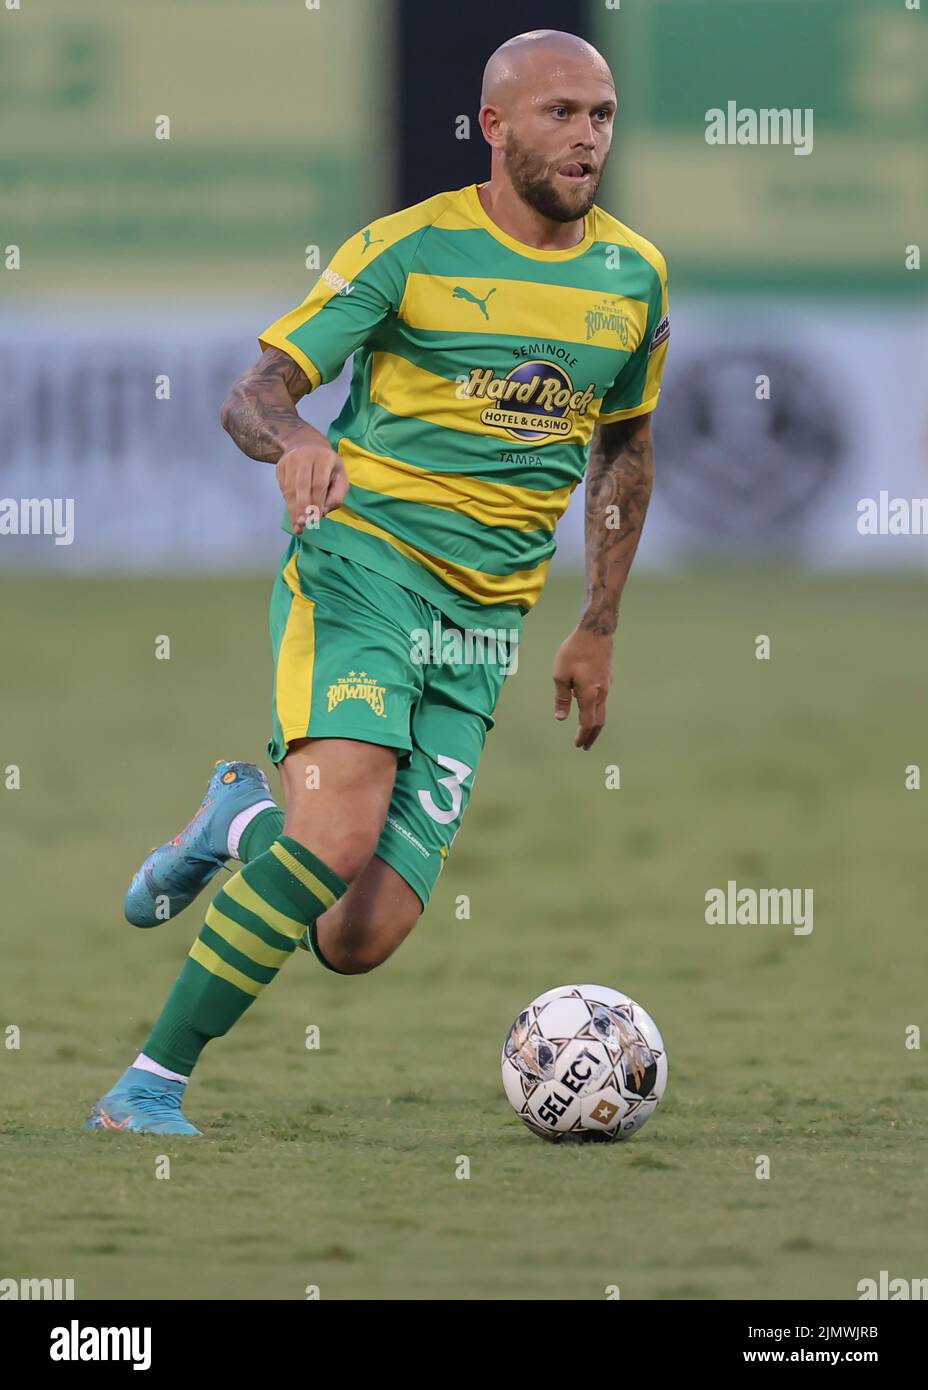 St. Petersburg, FL: Tampa Bay Rowdies midfielder Nicky Law (31) dribbles the ball upfield during a USL soccer game against Detroit City, Saturday, Aug Stock Photo